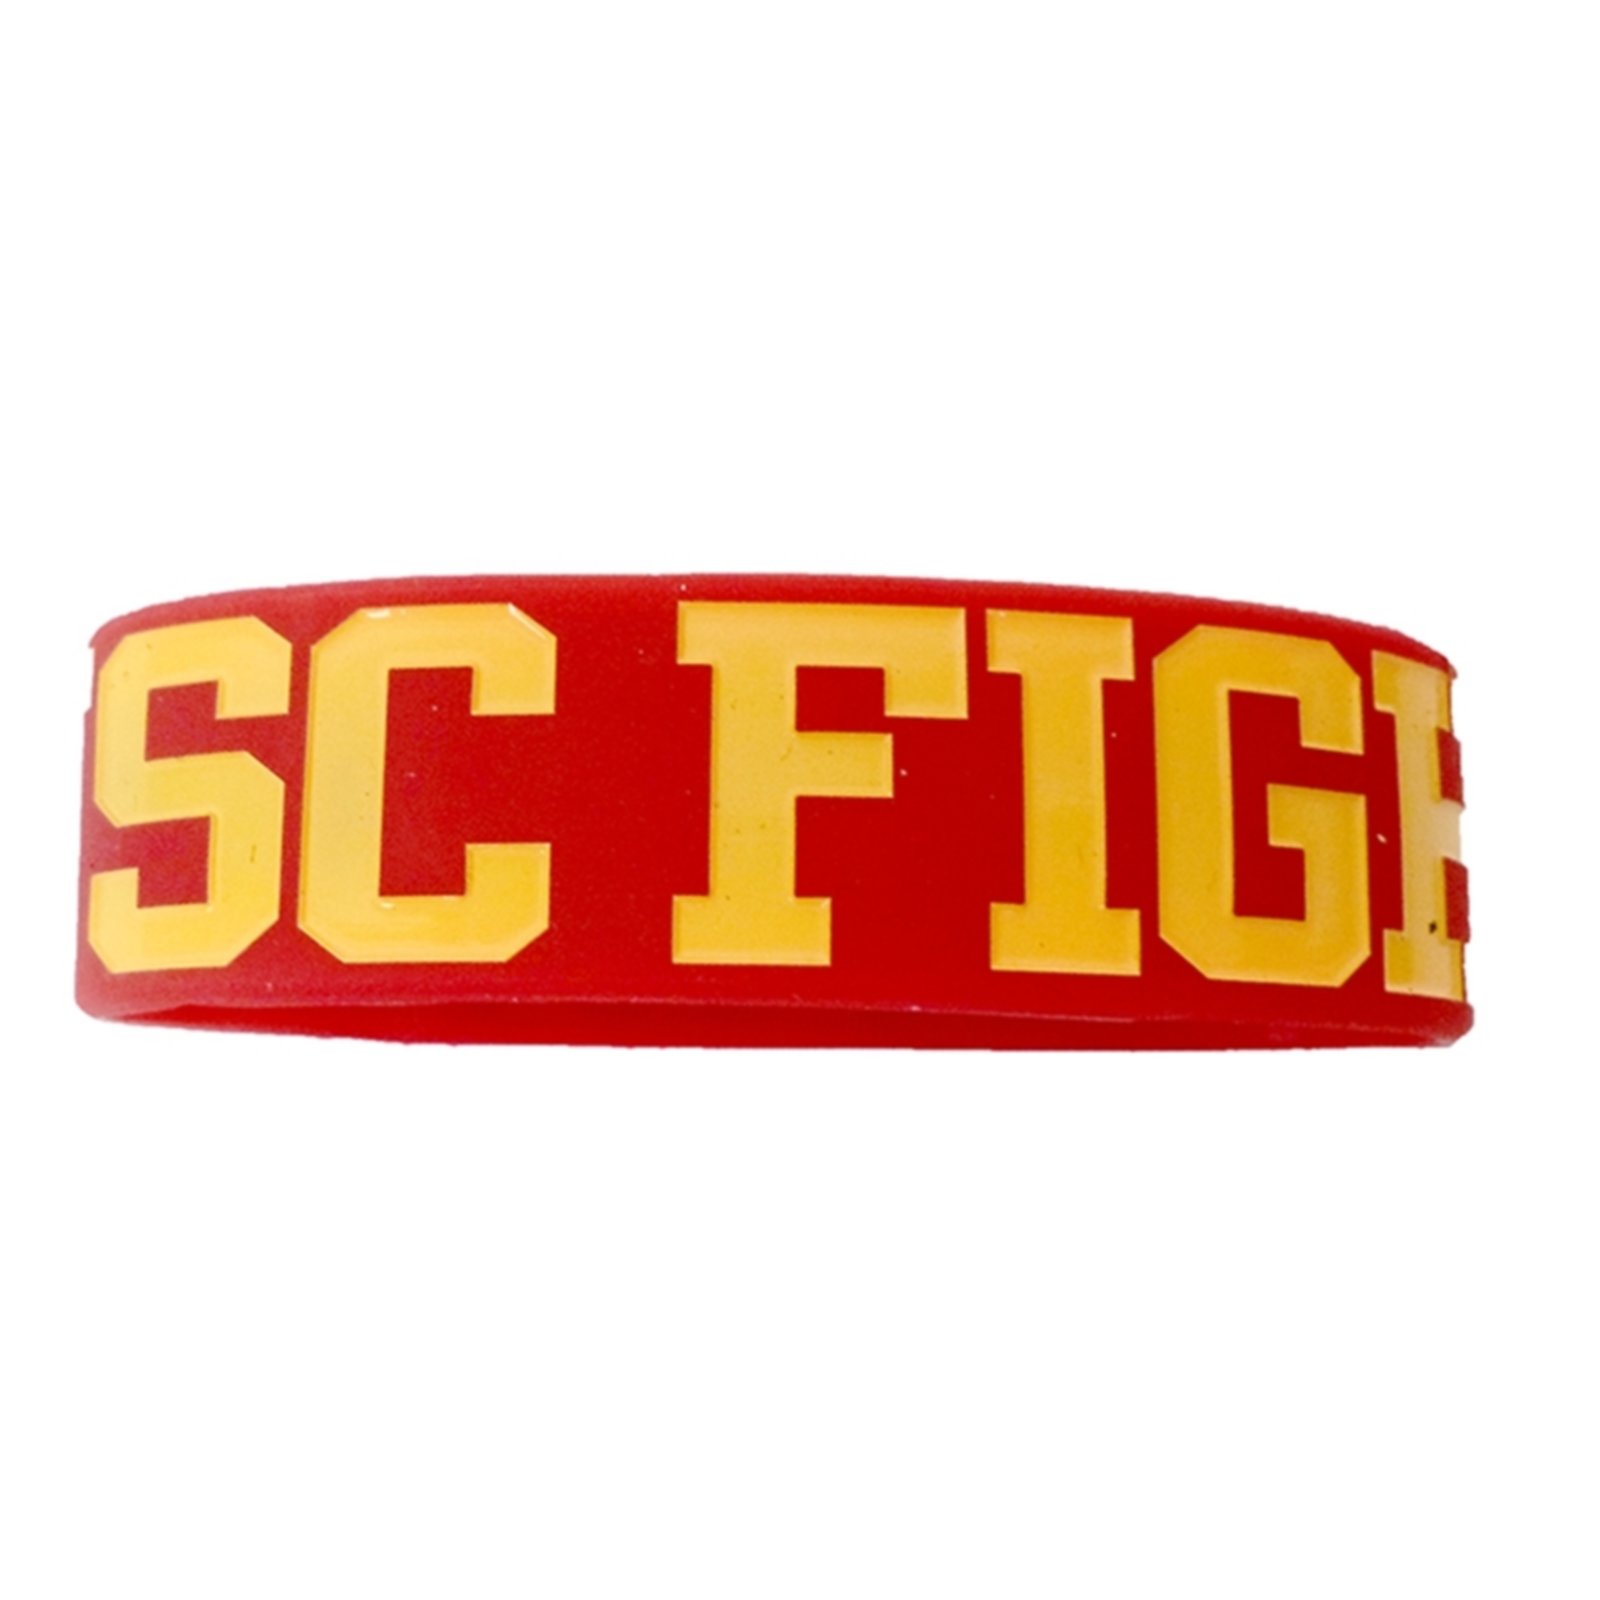 Fight On! Silicon Debossed Wrist Band Cardinal 1in image01